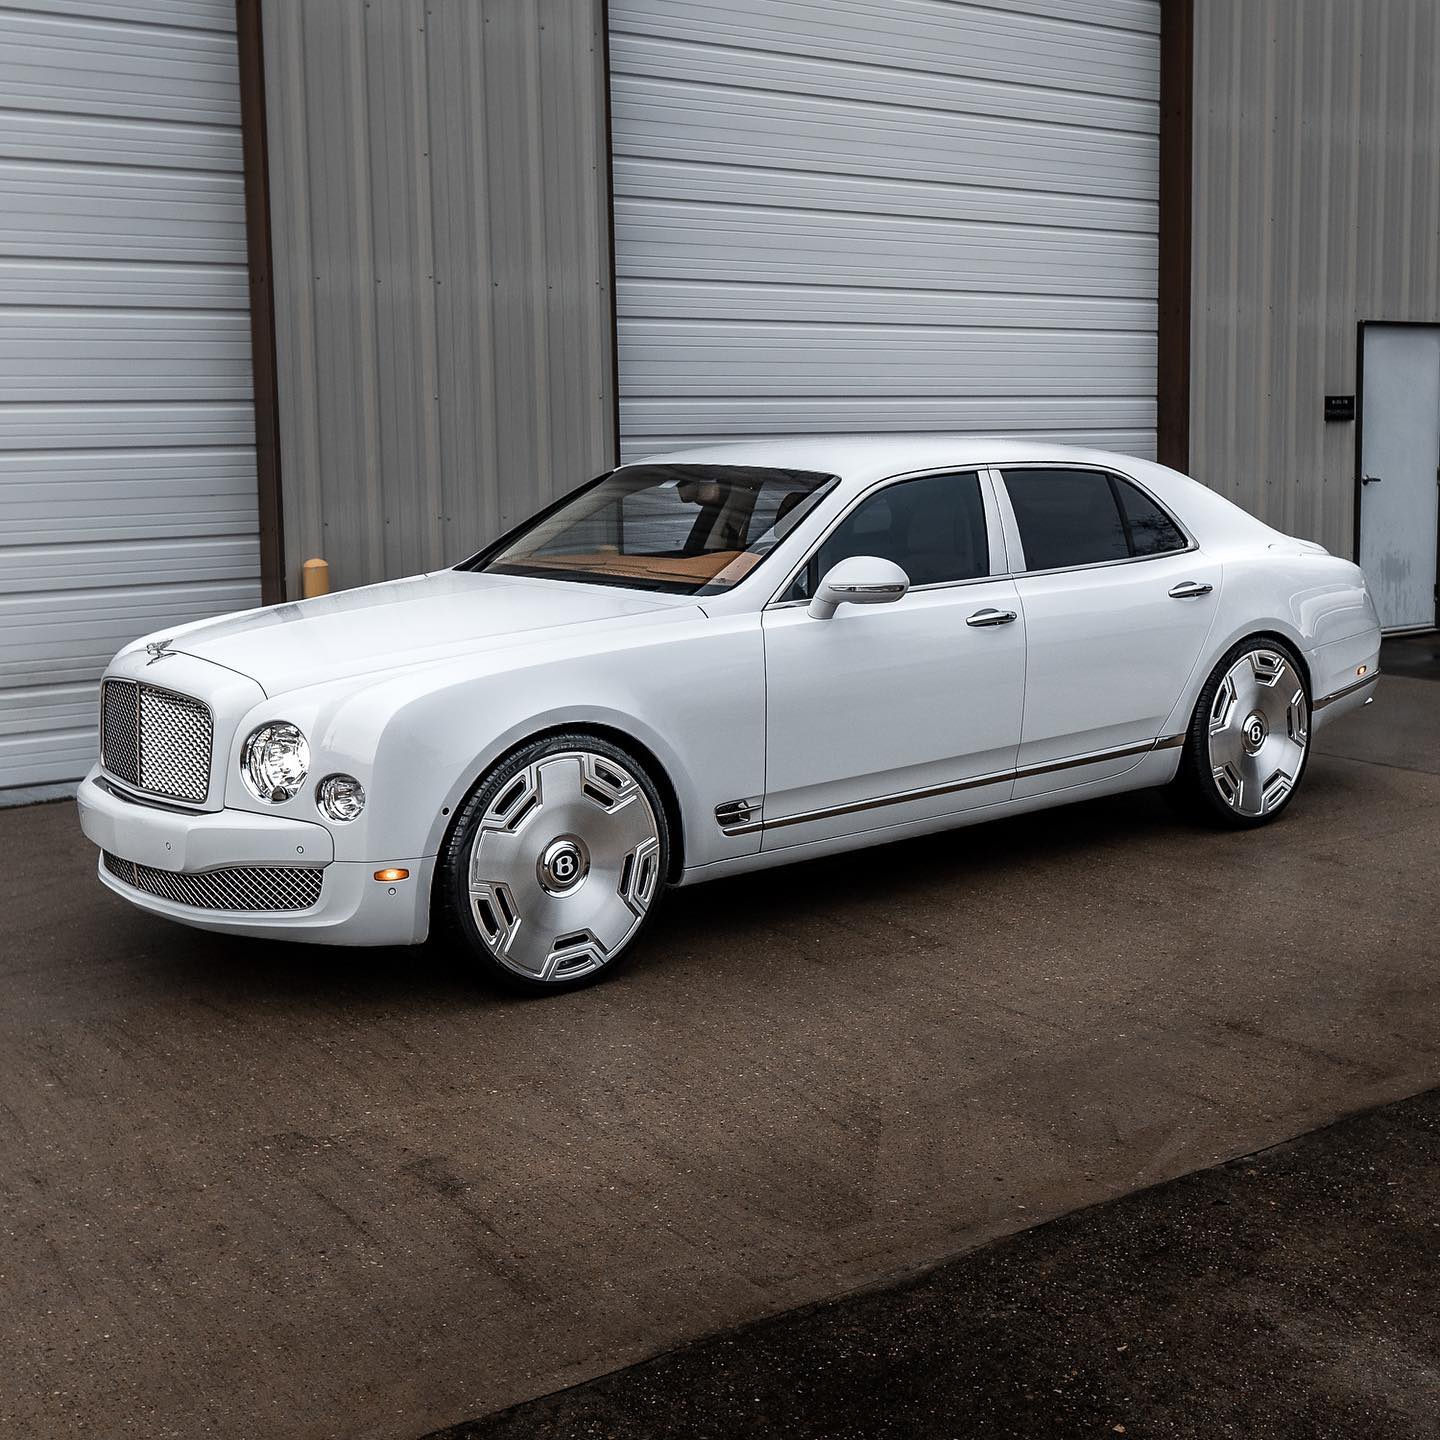 Rare Bentley Mulsanne Rides Low on Brushed and Polished AGL73 Forged  Monoblocks - autoevolution